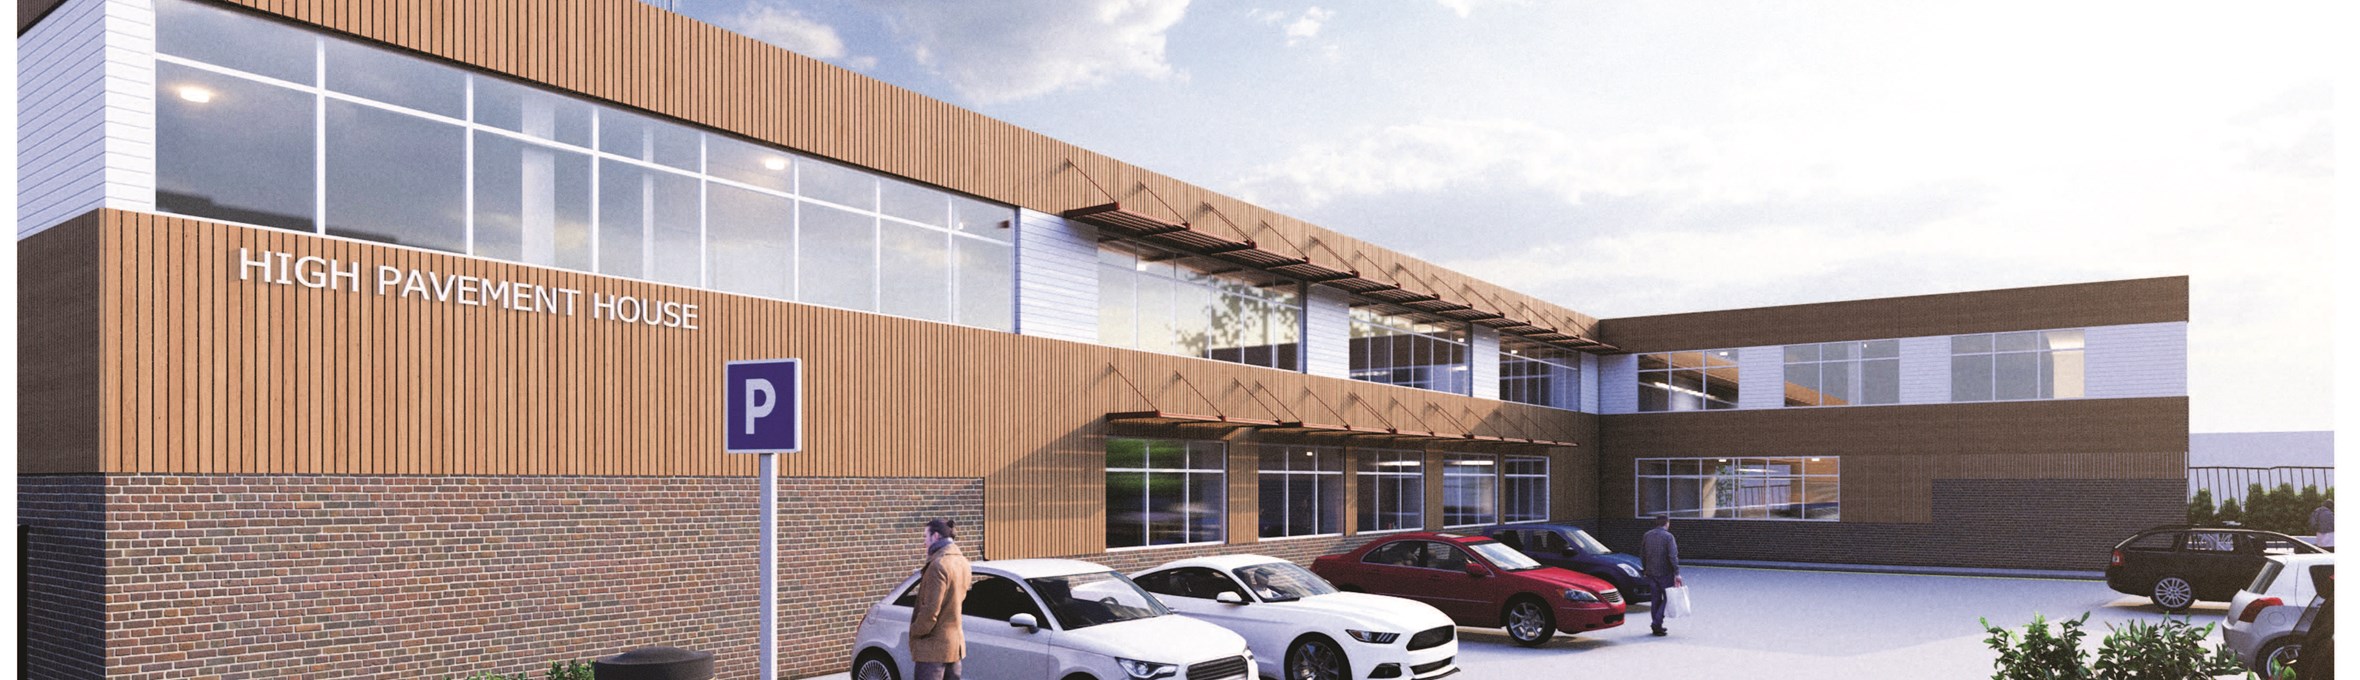 artists impression of how high pavement house will look, the building is cladded in wood 